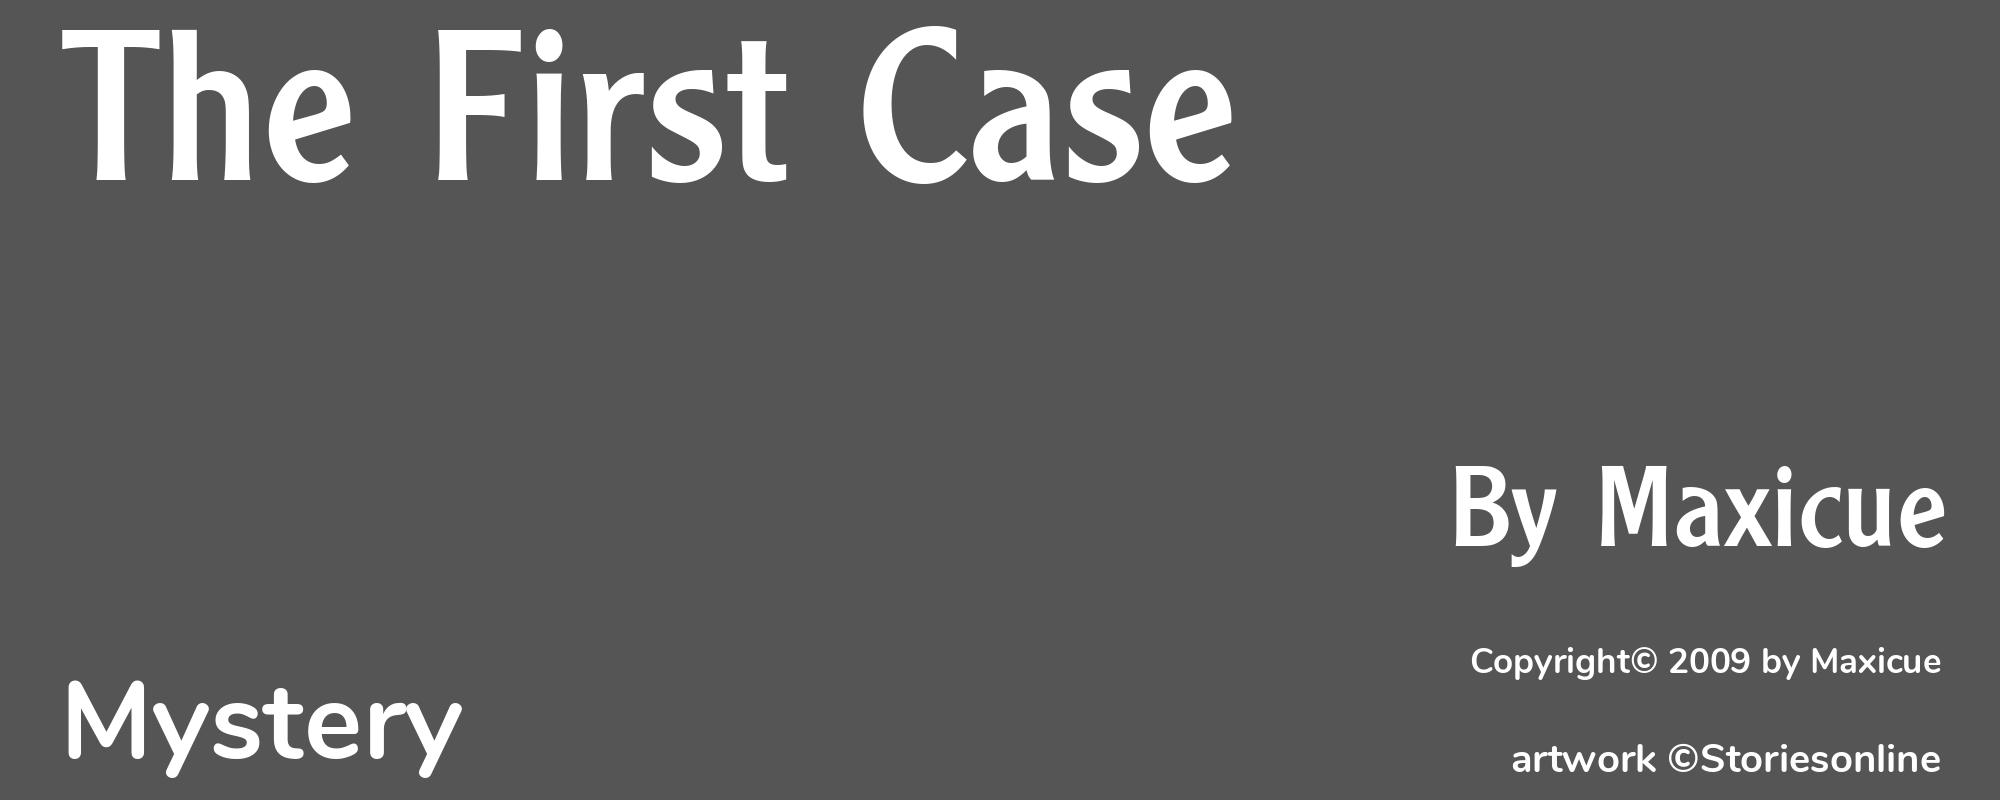 The First Case - Cover